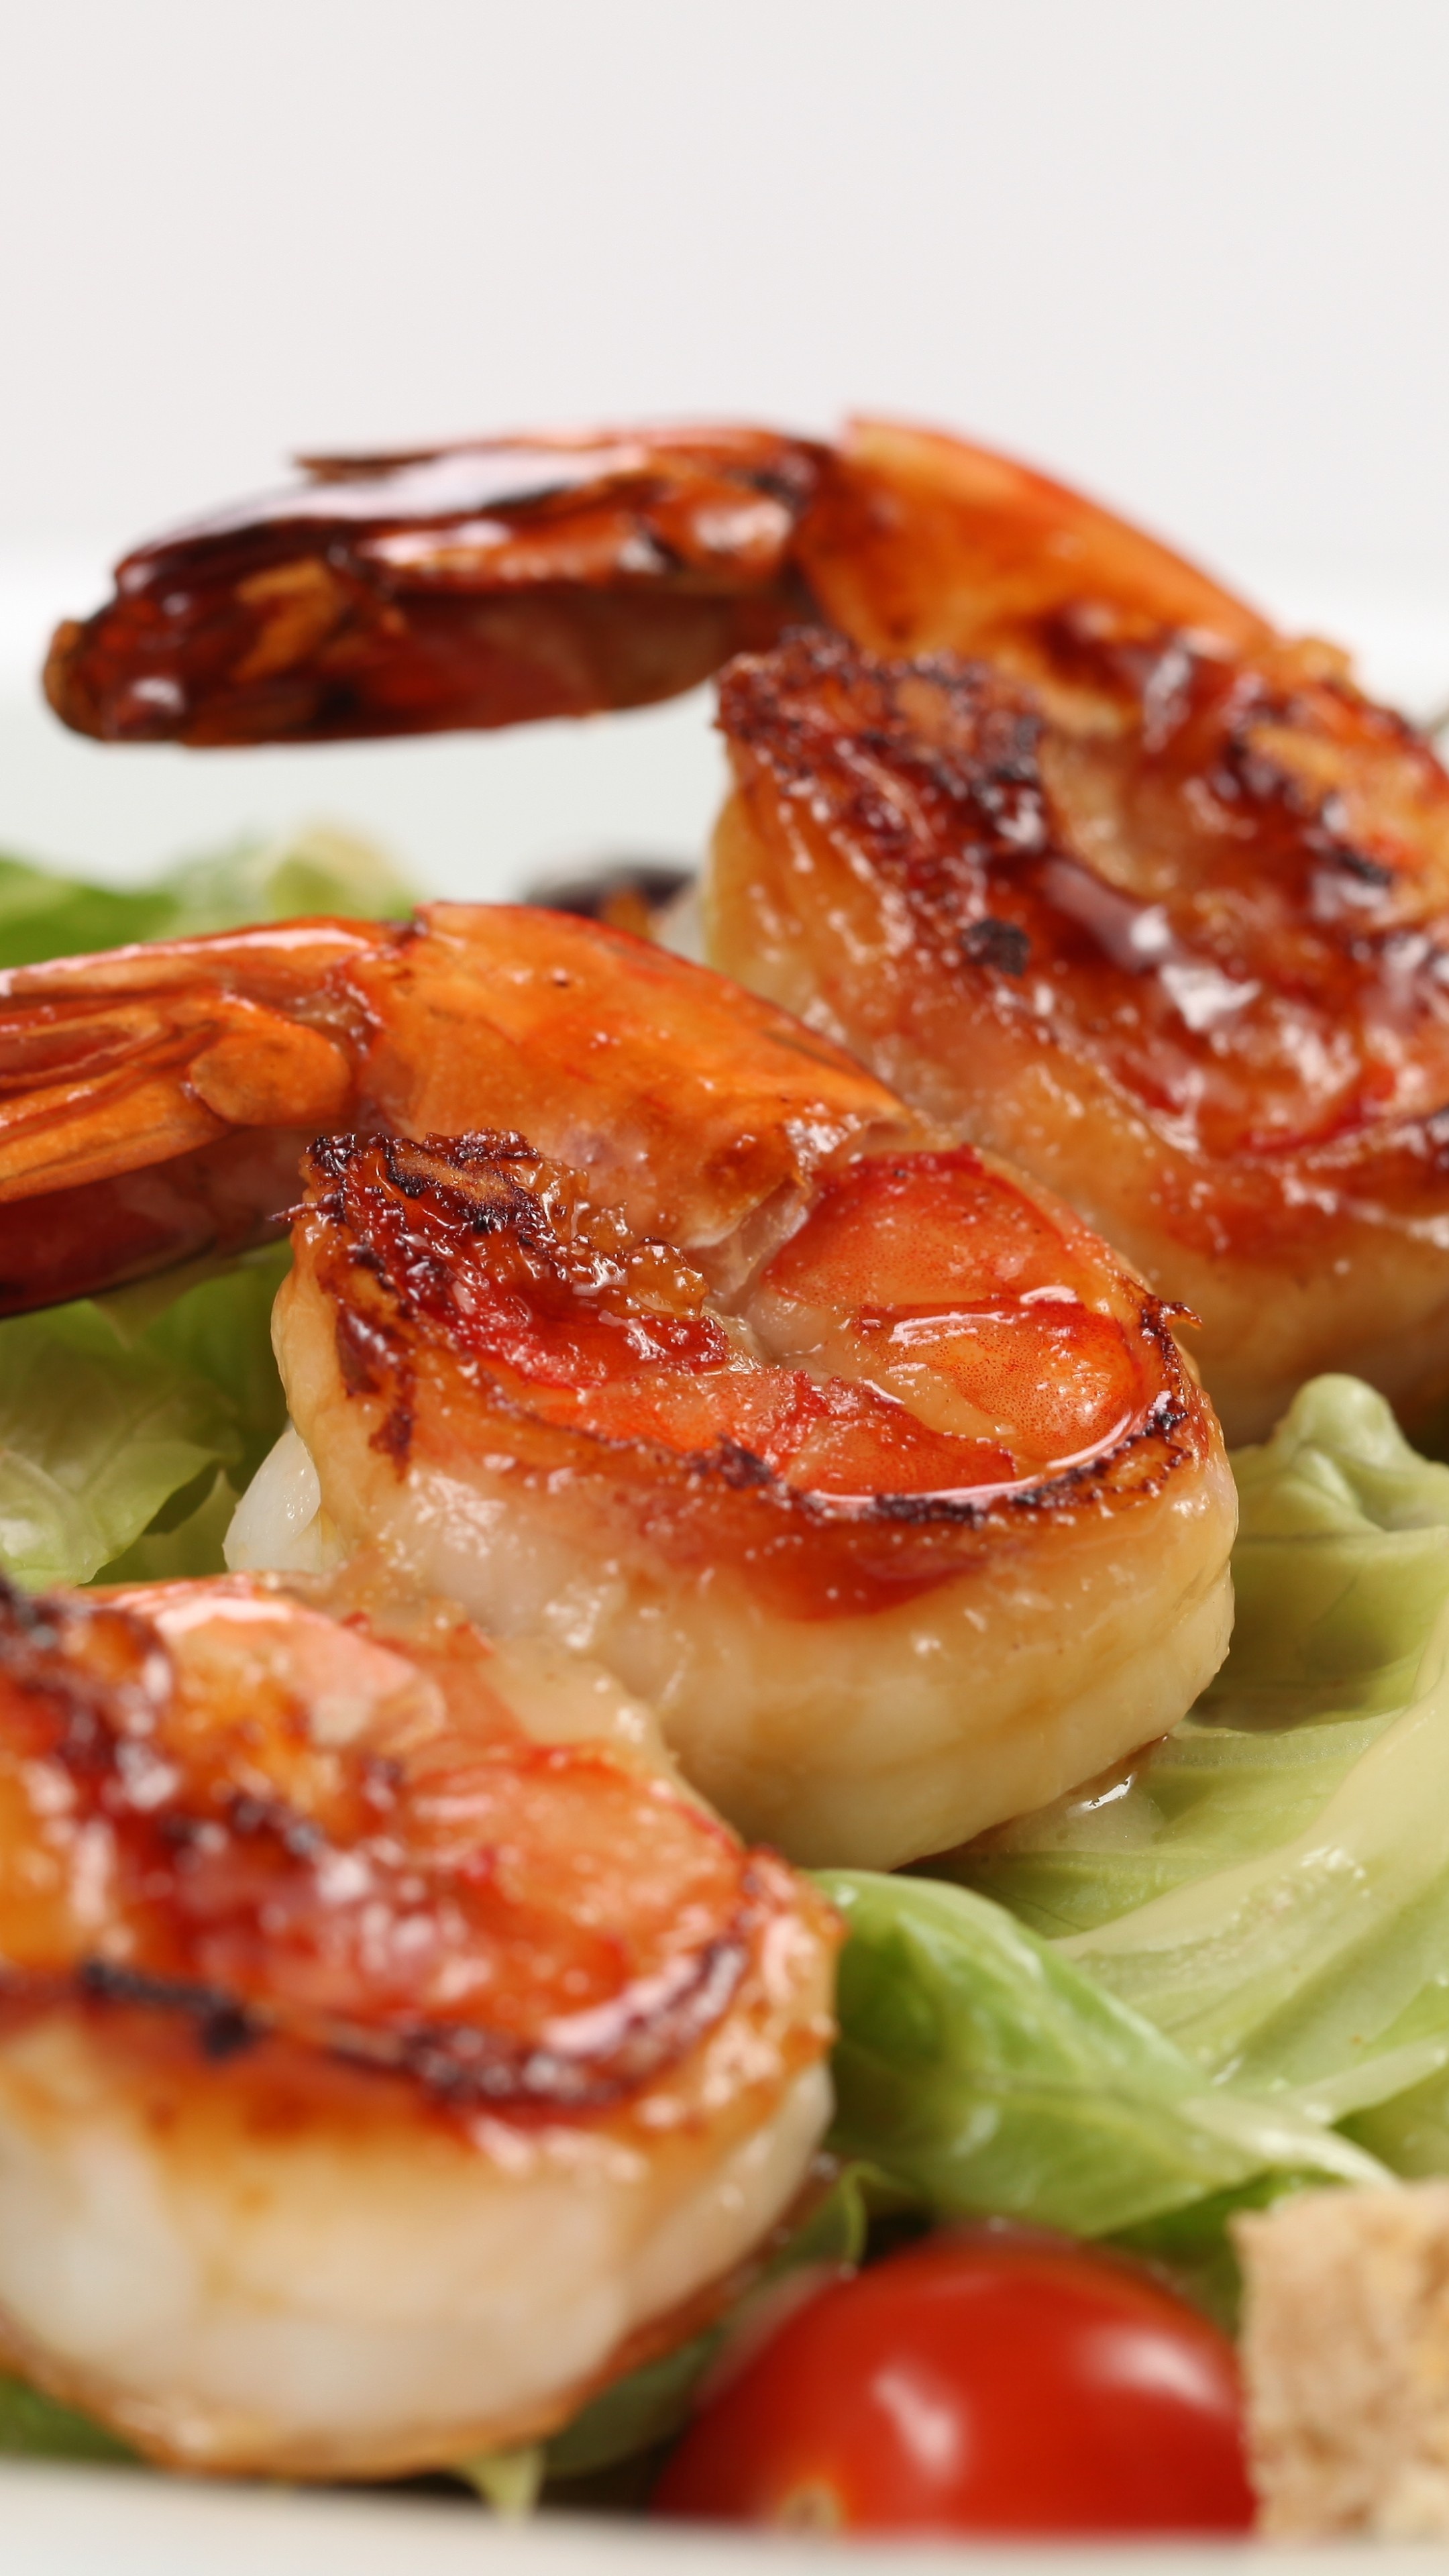 Seafood: Shrimp, Swimming crustaceans with long narrow muscular abdomens. 2160x3840 4K Background.